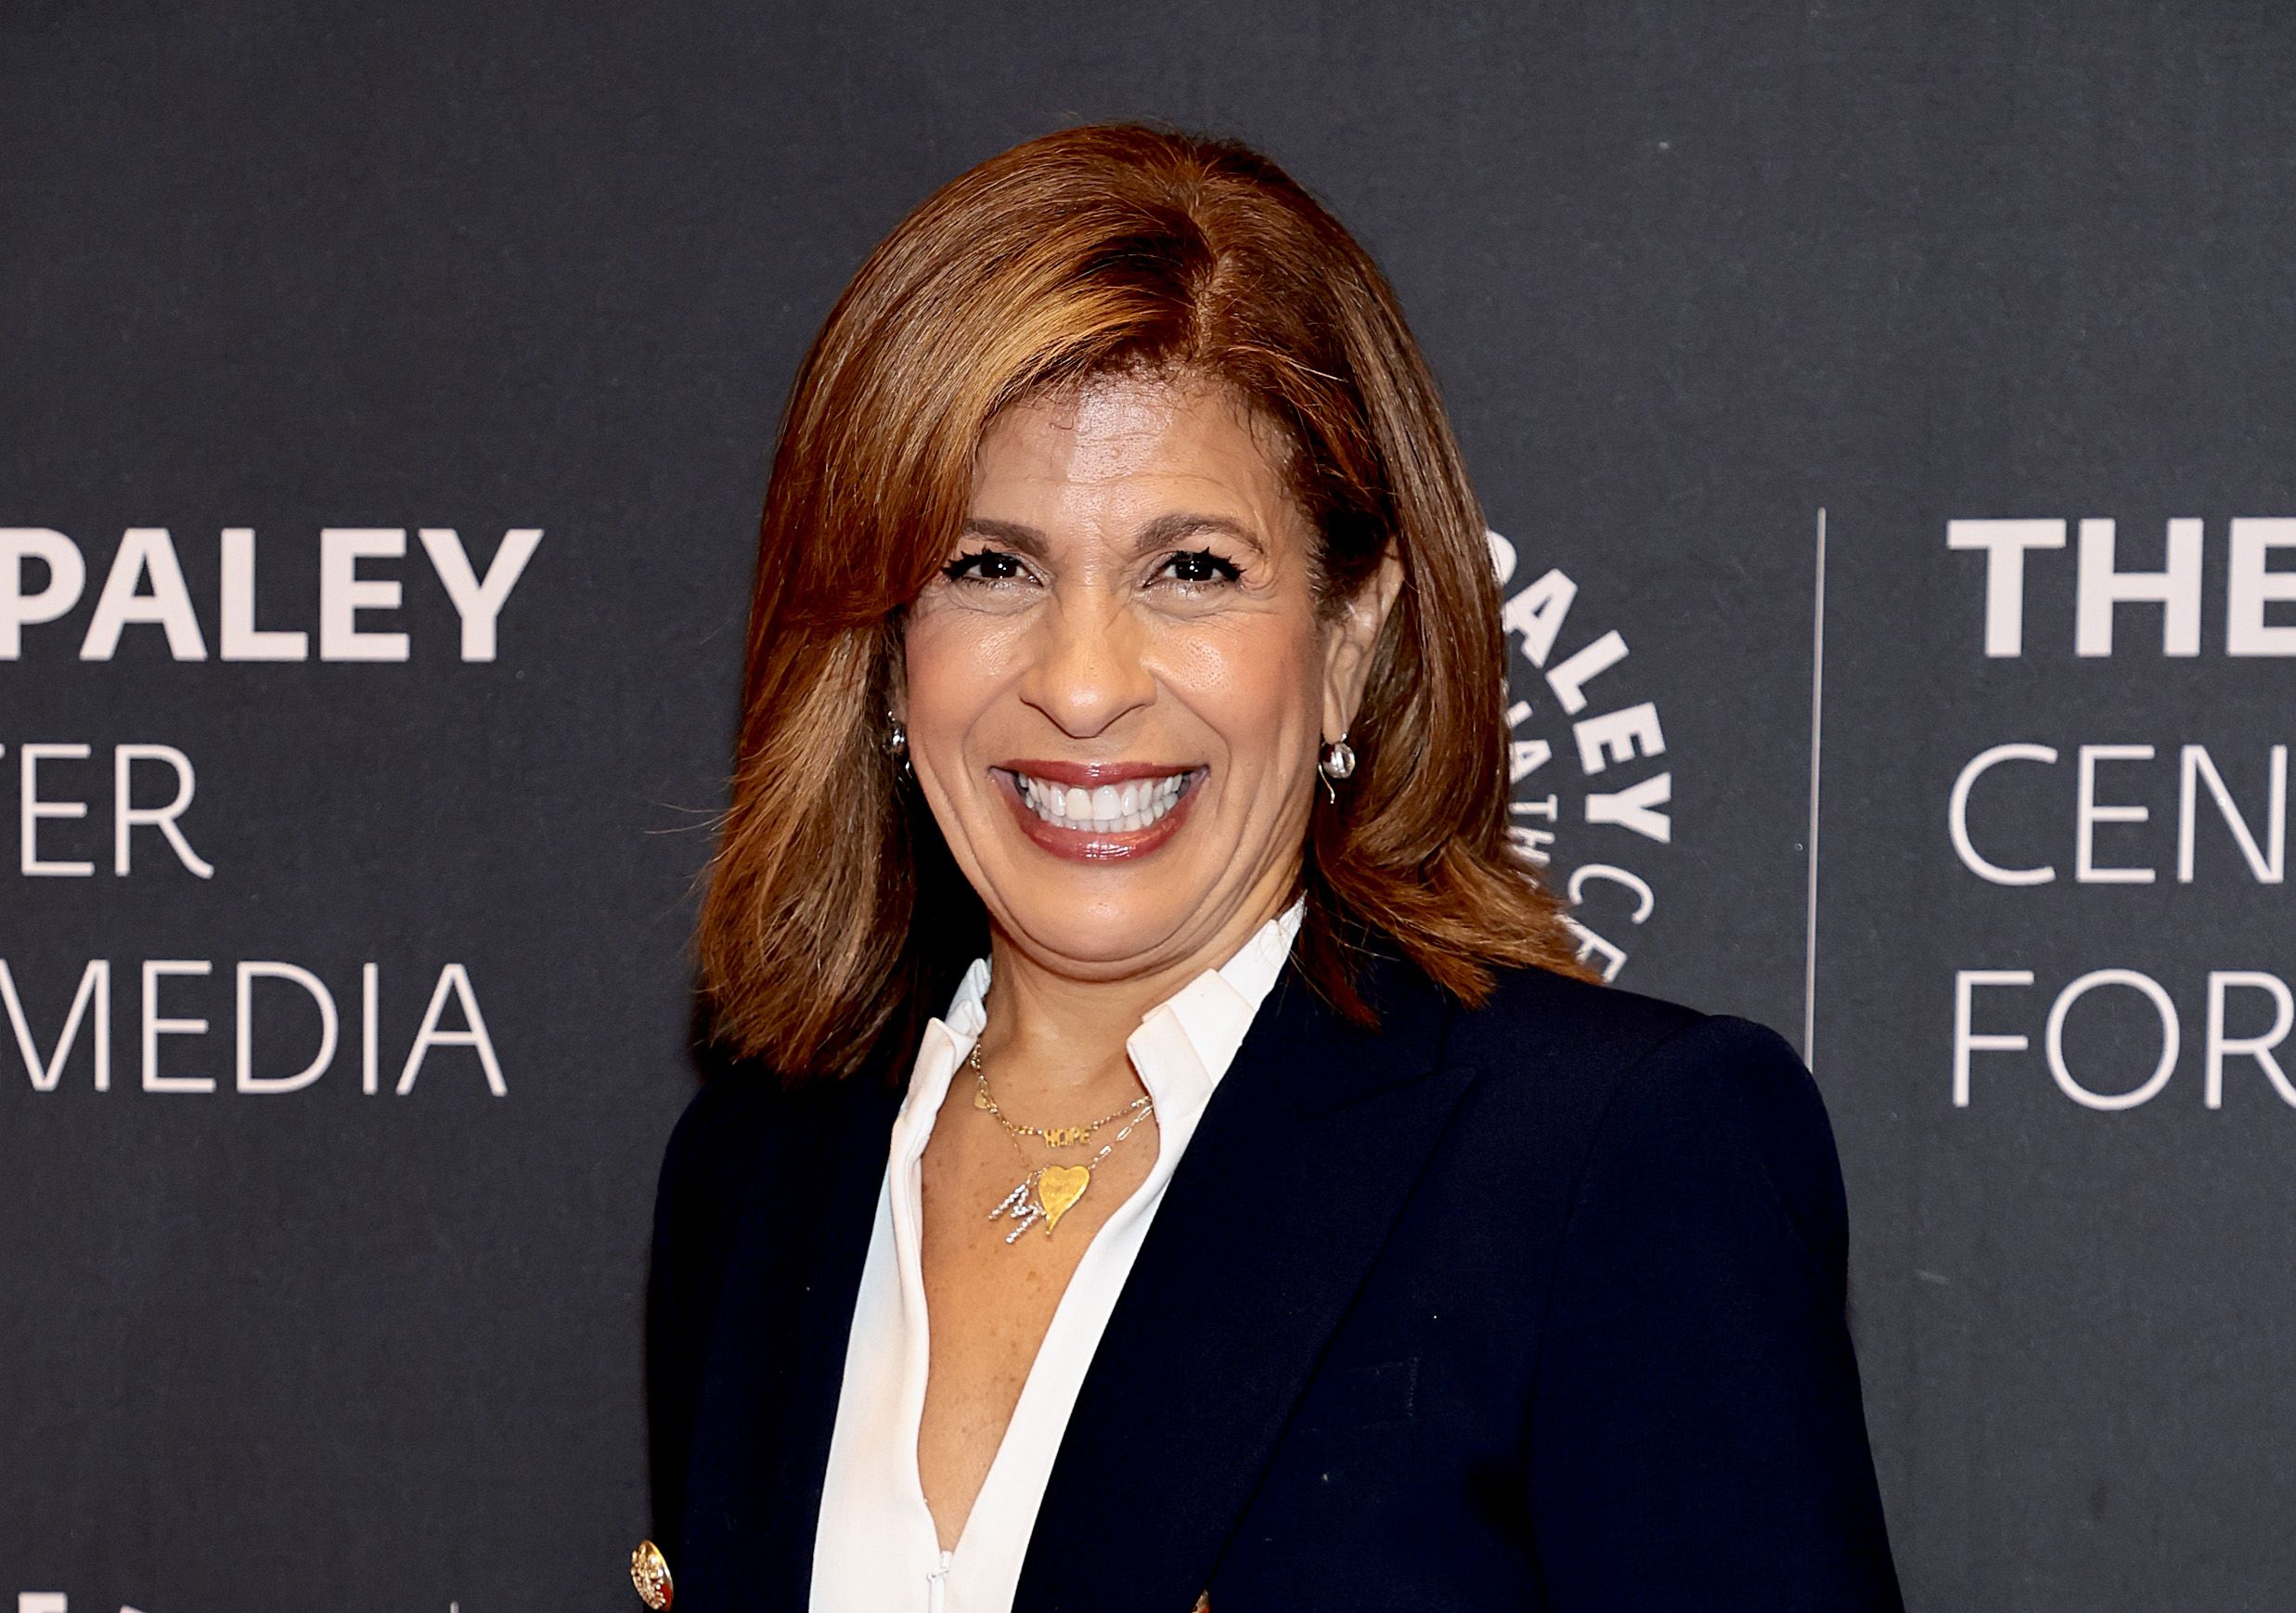 Hoda Kotb's dream first date would be at Chili's